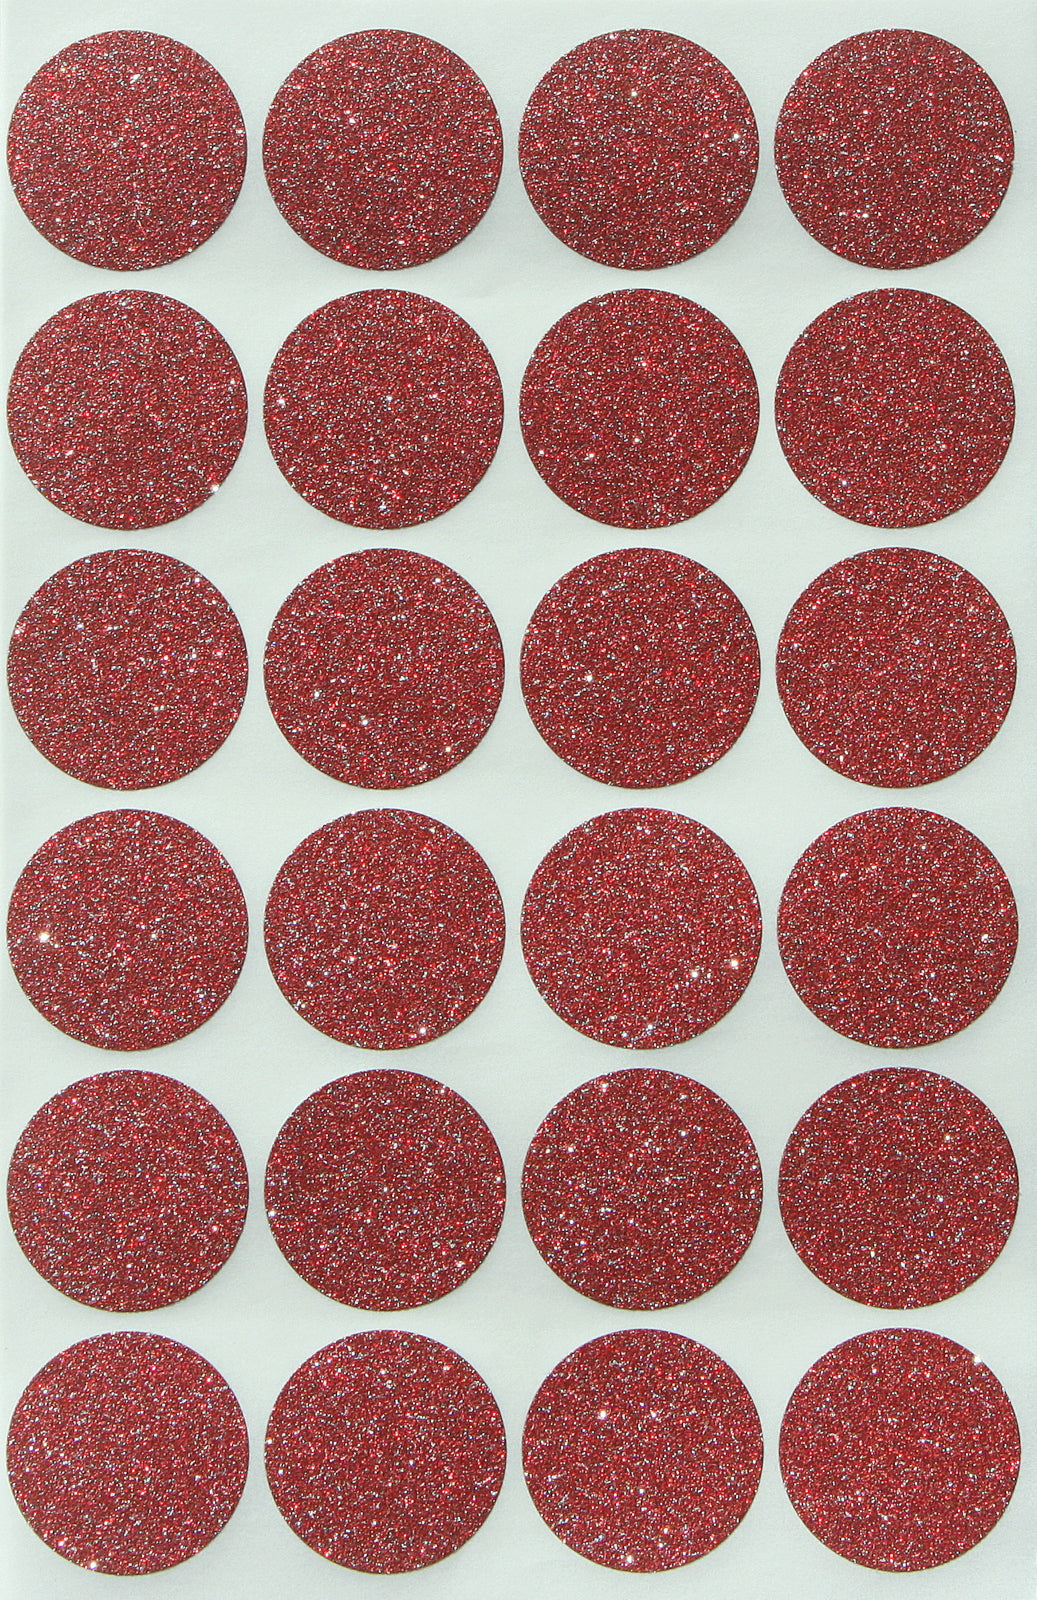 Round Glitter Envelope Seals Any Color Gold Glitter Stickers Round Glitter  Stickers Glitter Envelope Seals Round Gold Stickers 